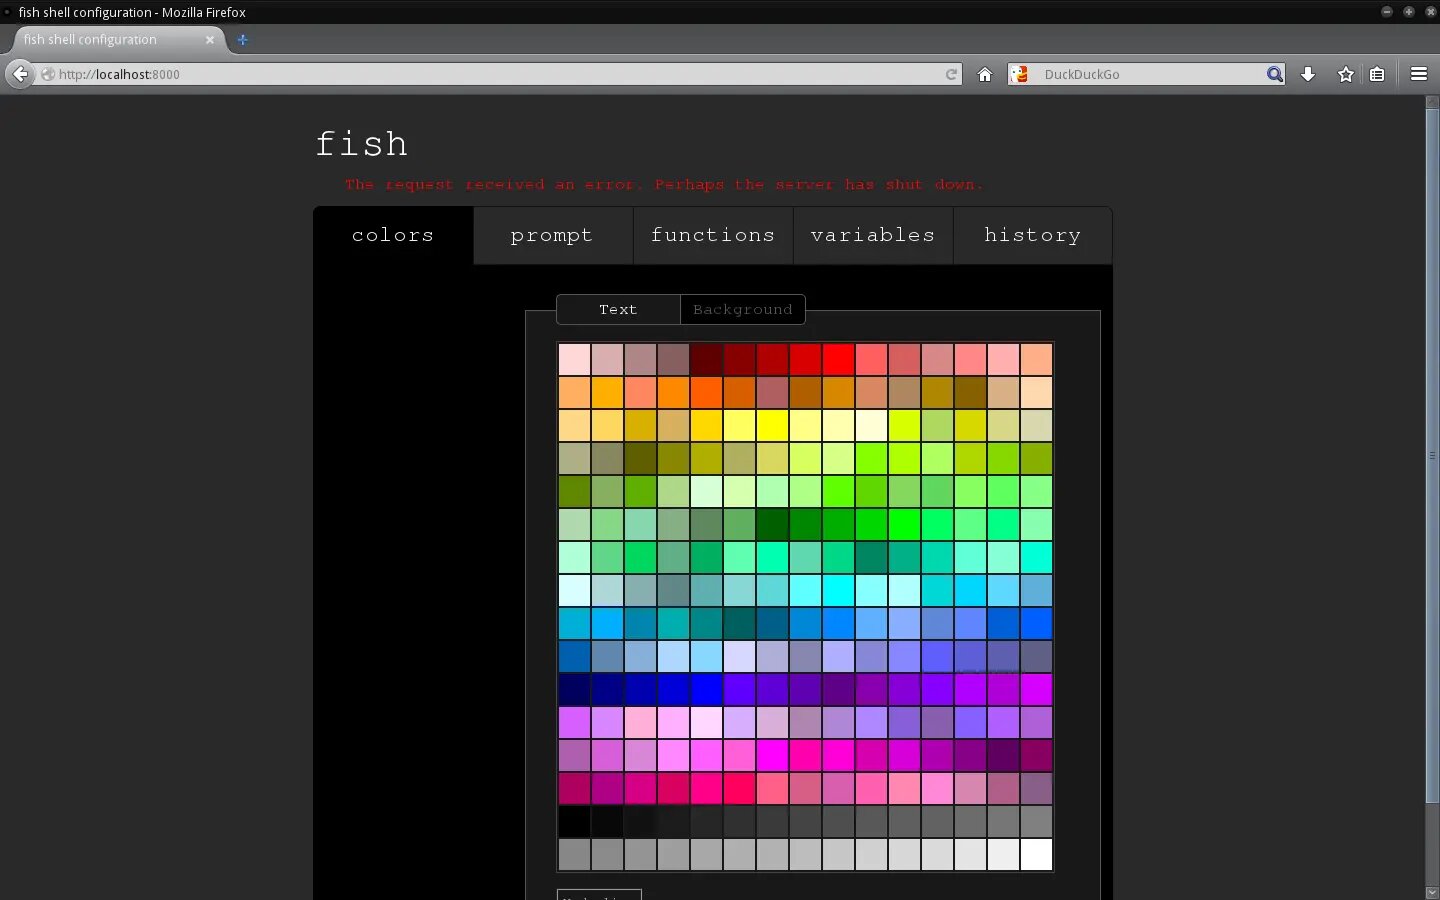 Current fish configuration loaded in your default web browser.